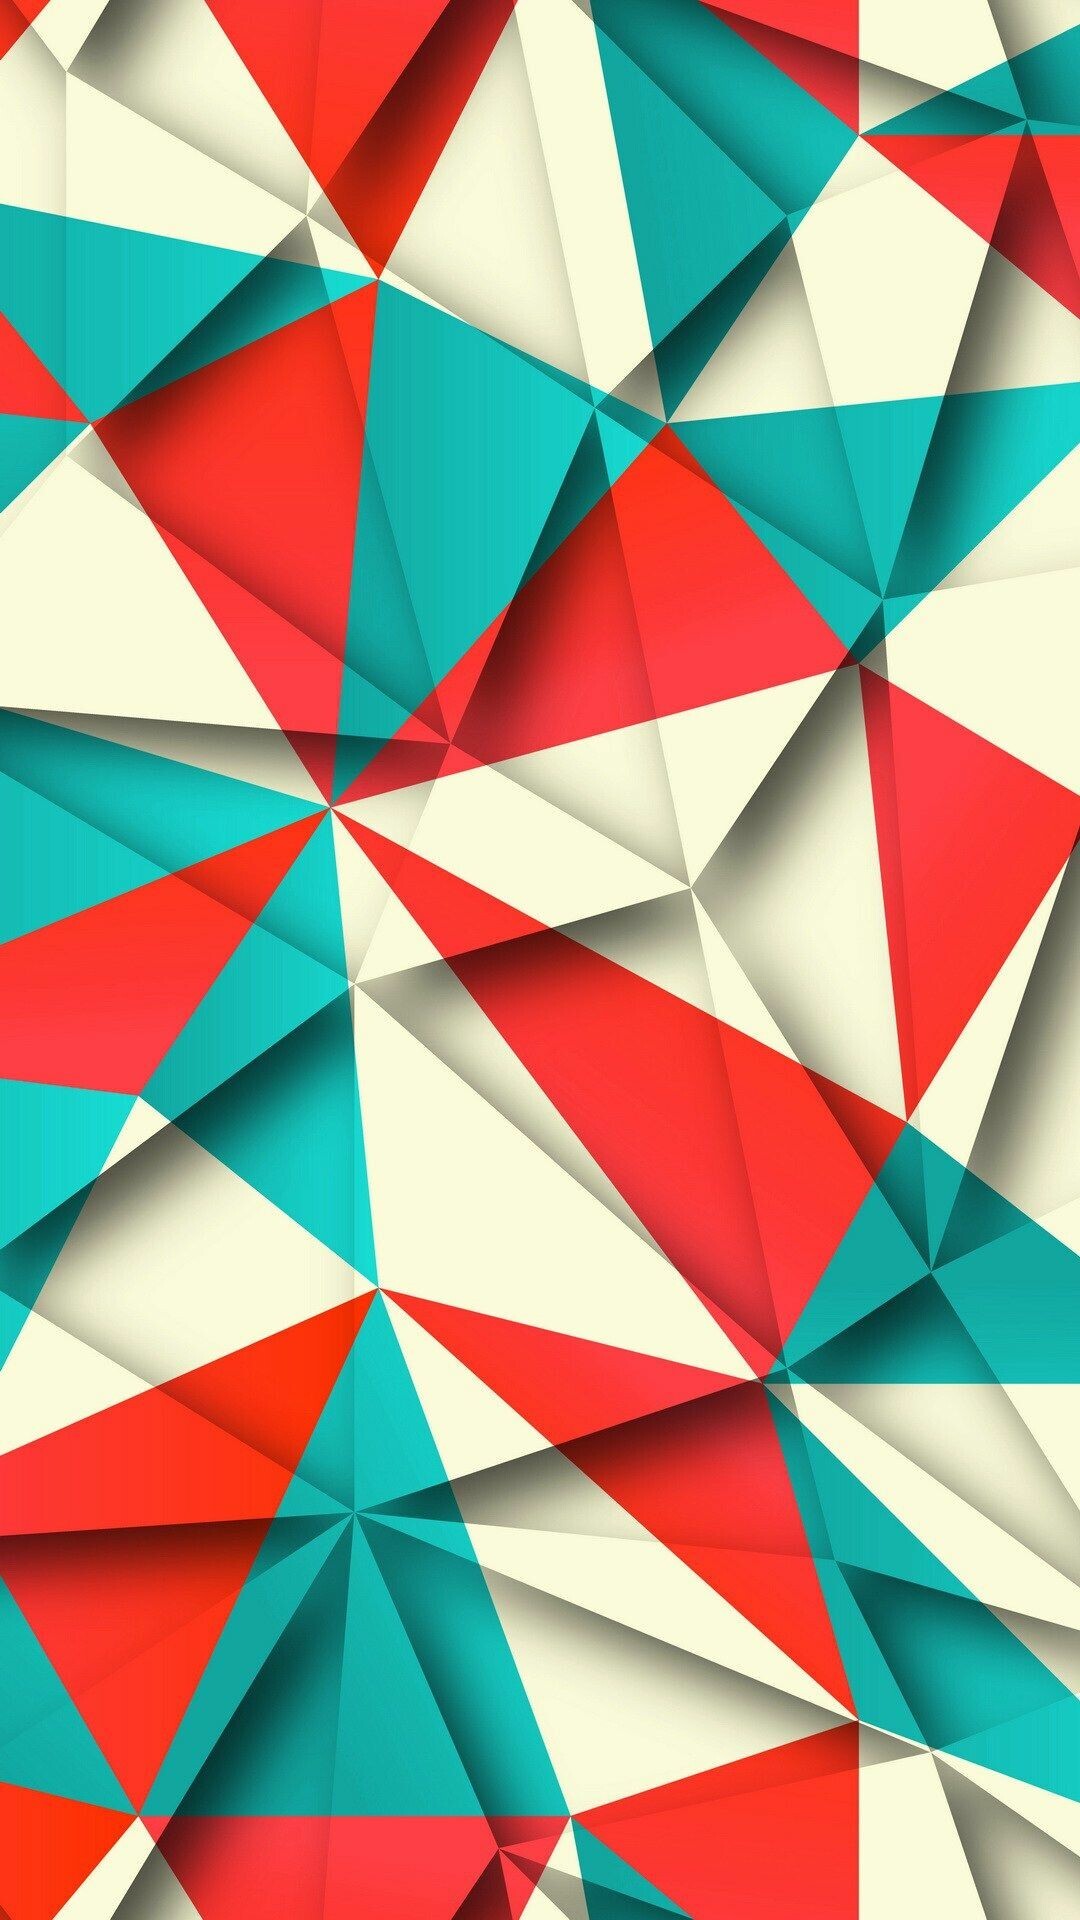 Triangle: Abstract polygonal figures, Reflex angles, Mosaic. 1080x1920 Full HD Background.